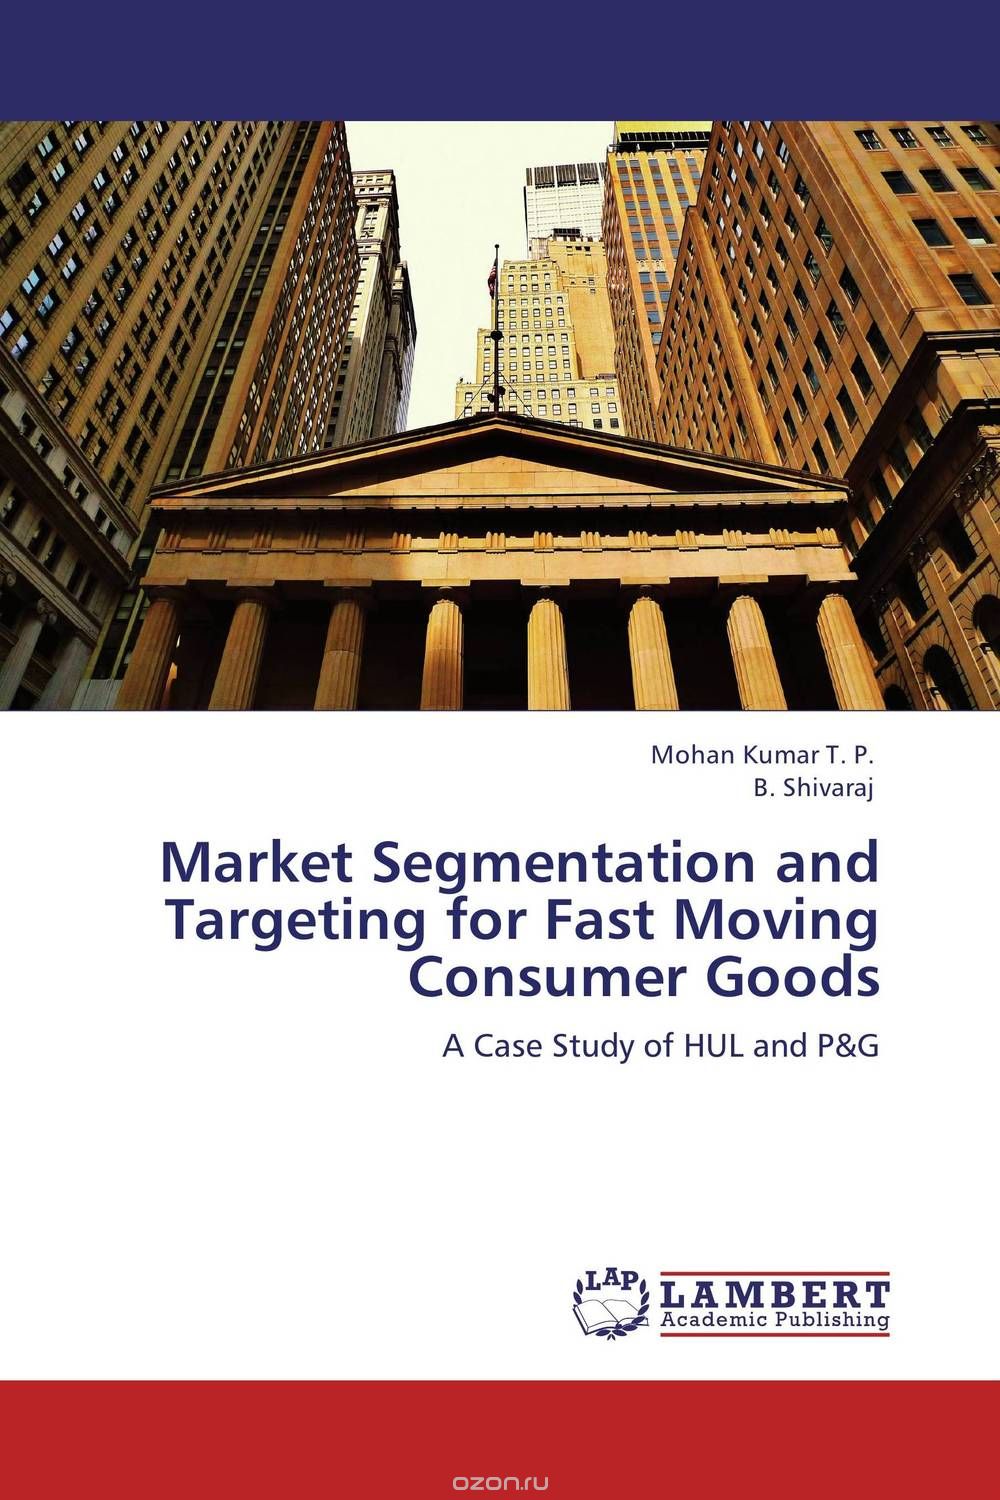 Market Segmentation and Targeting for Fast Moving Consumer Goods